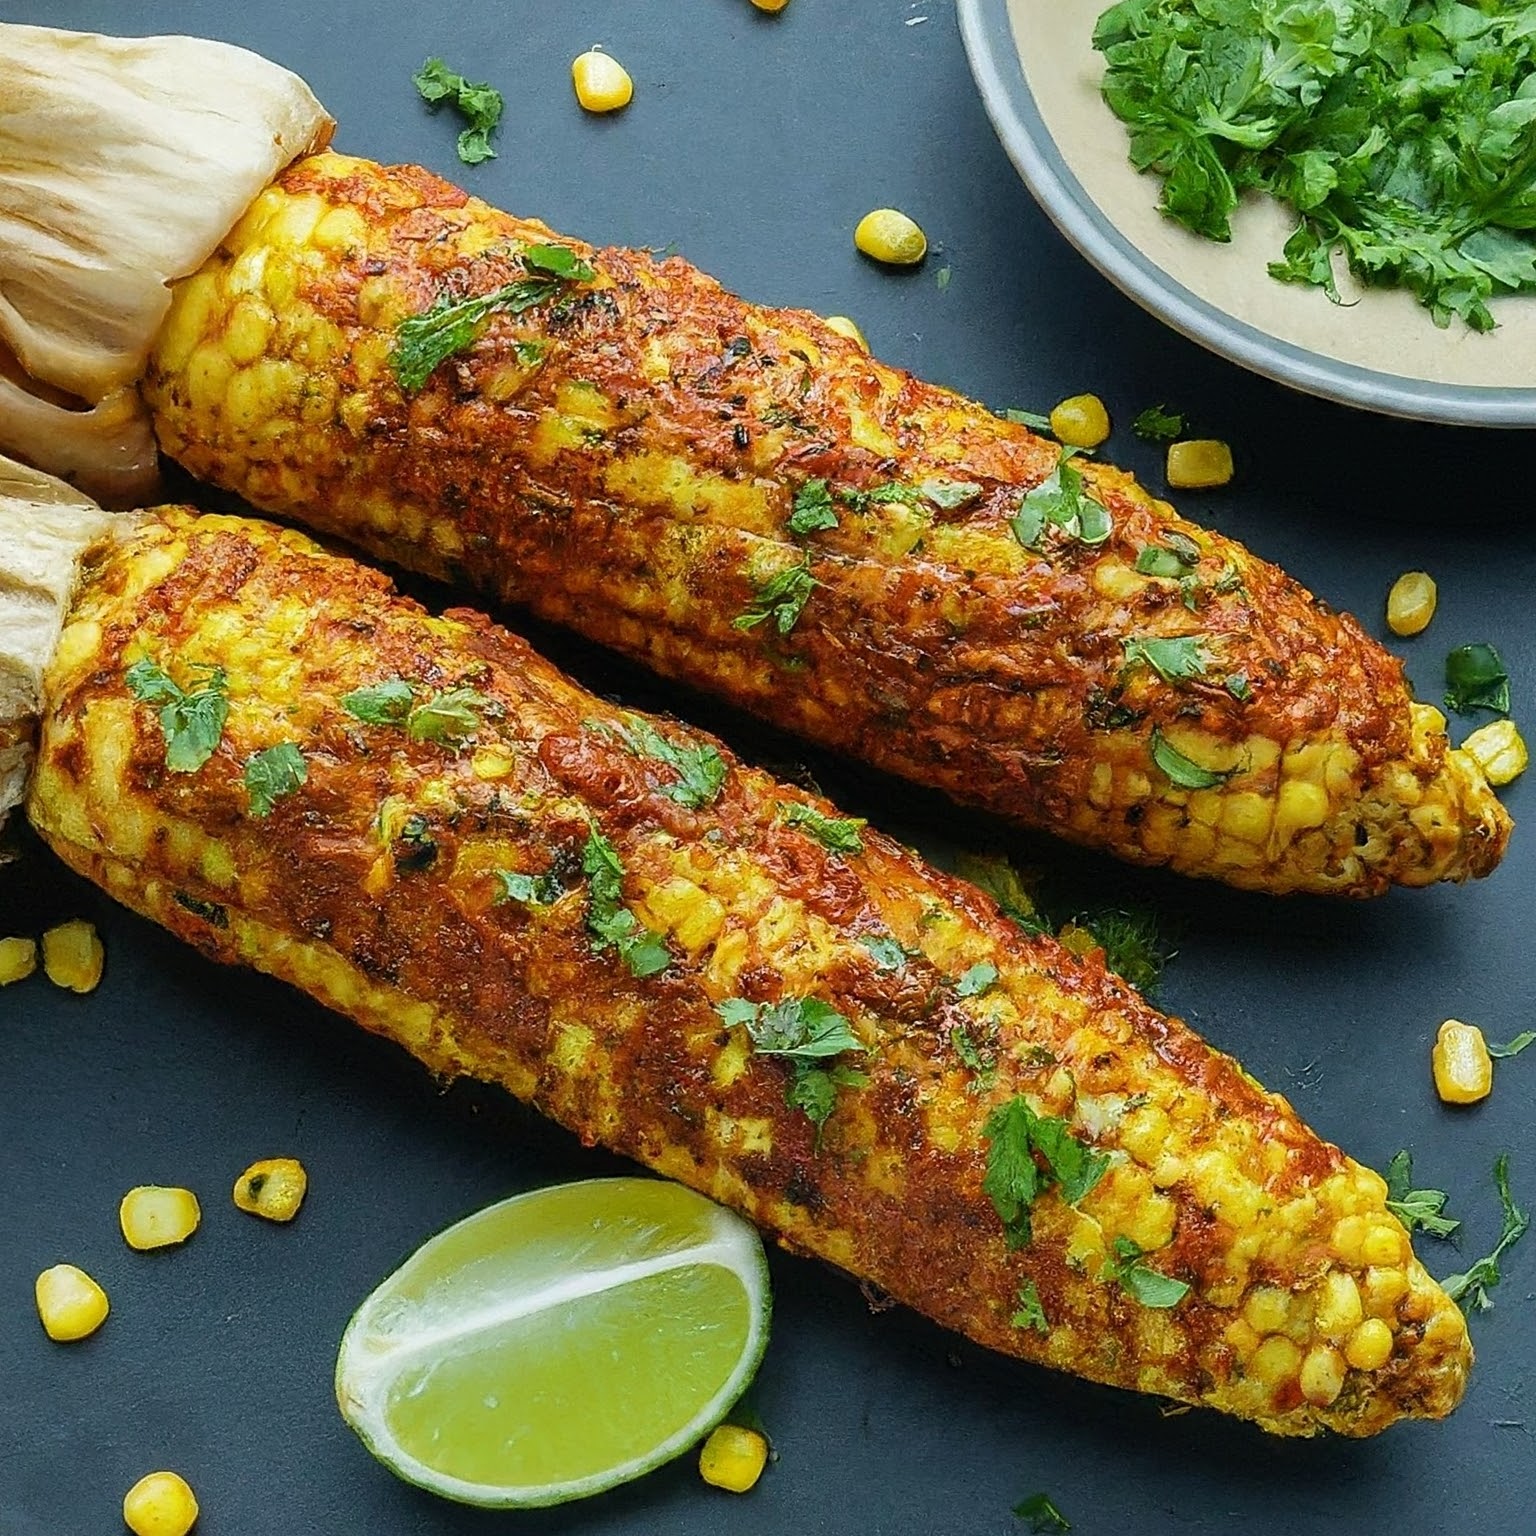 Steaming cob of corn coated in colourful masala paste, ready to be devoured.